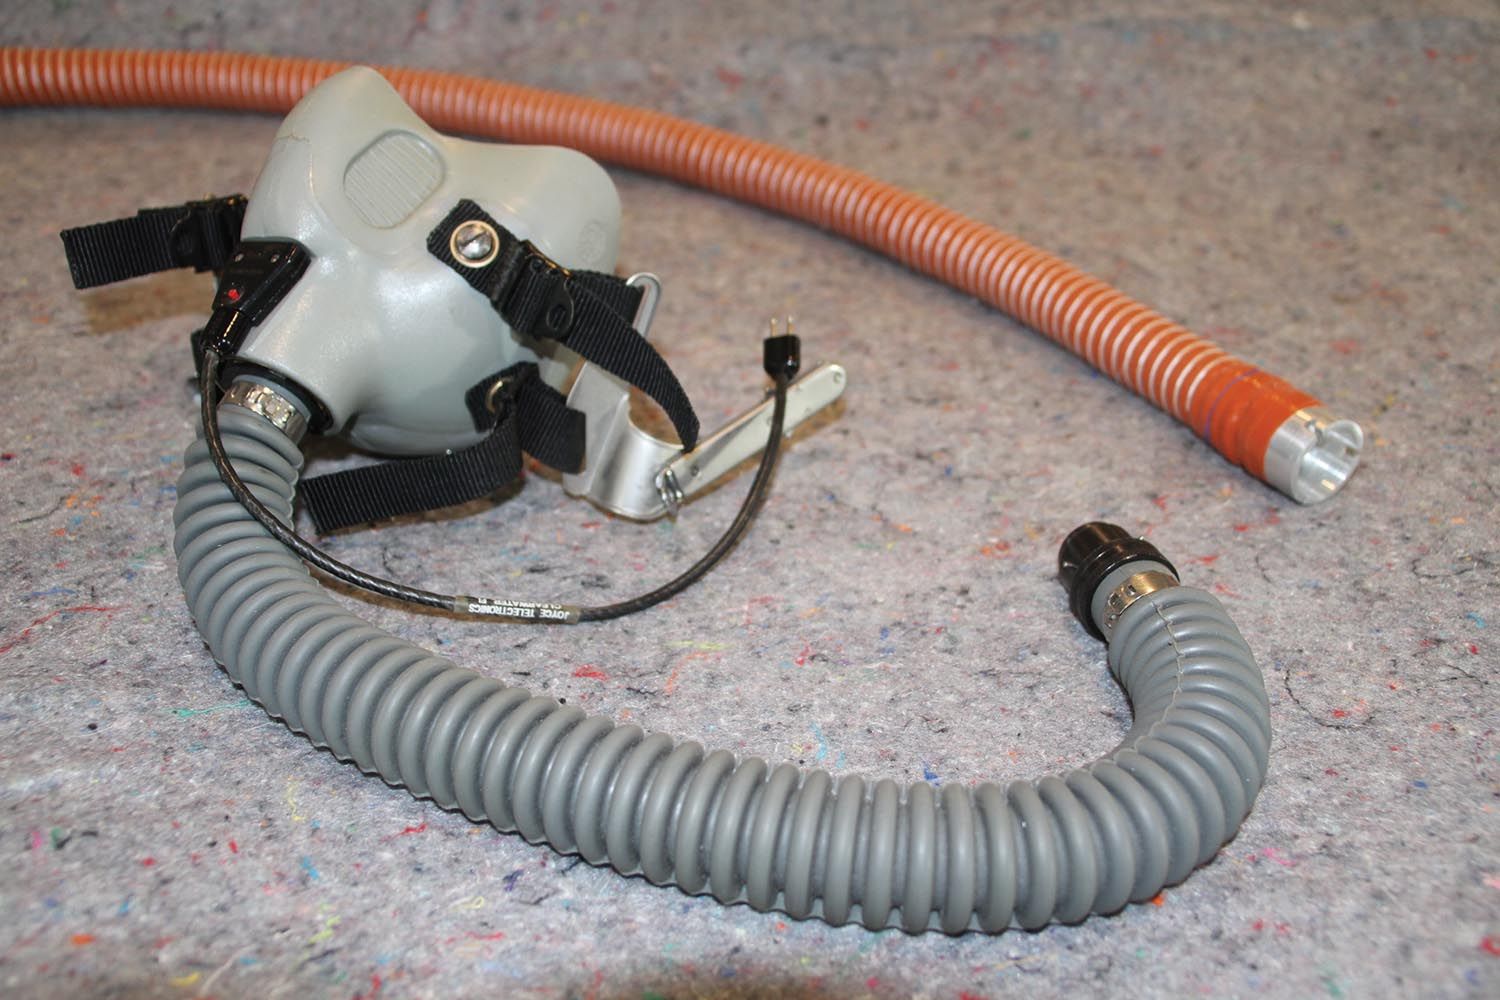 Three-quarter-inch SCAT tubing works well between the regulator and your mask hose.